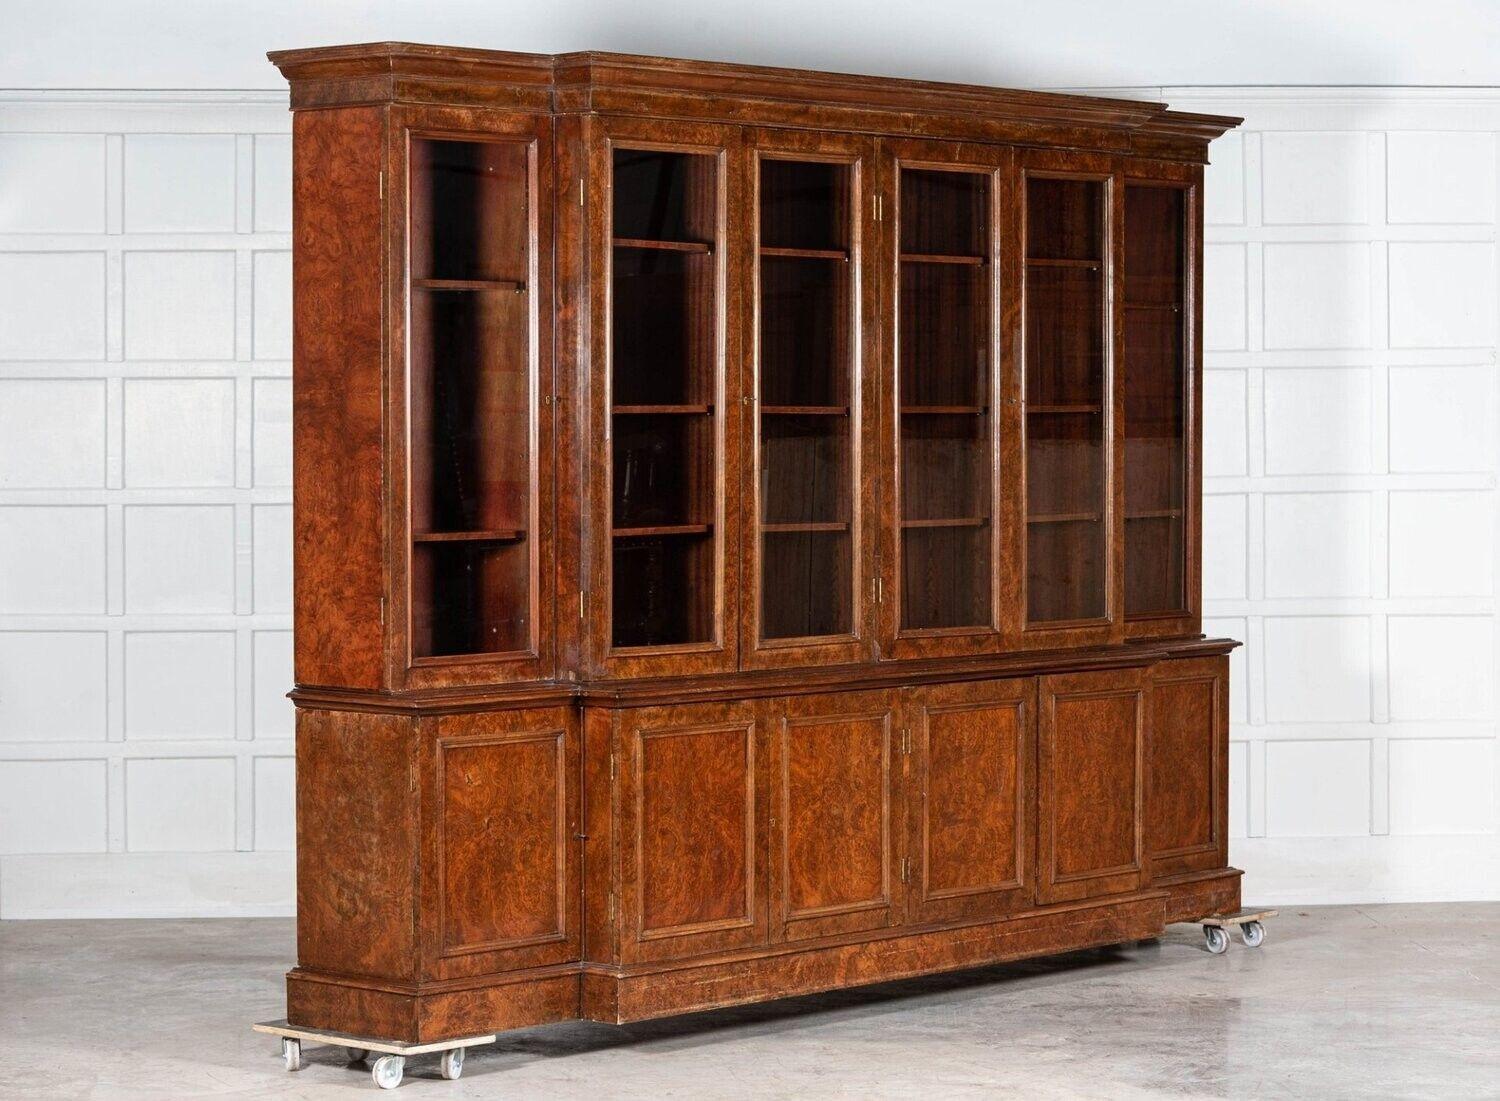 Monumental English Burr Walnut Breakfront Bookcase In Good Condition For Sale In Staffordshire, GB